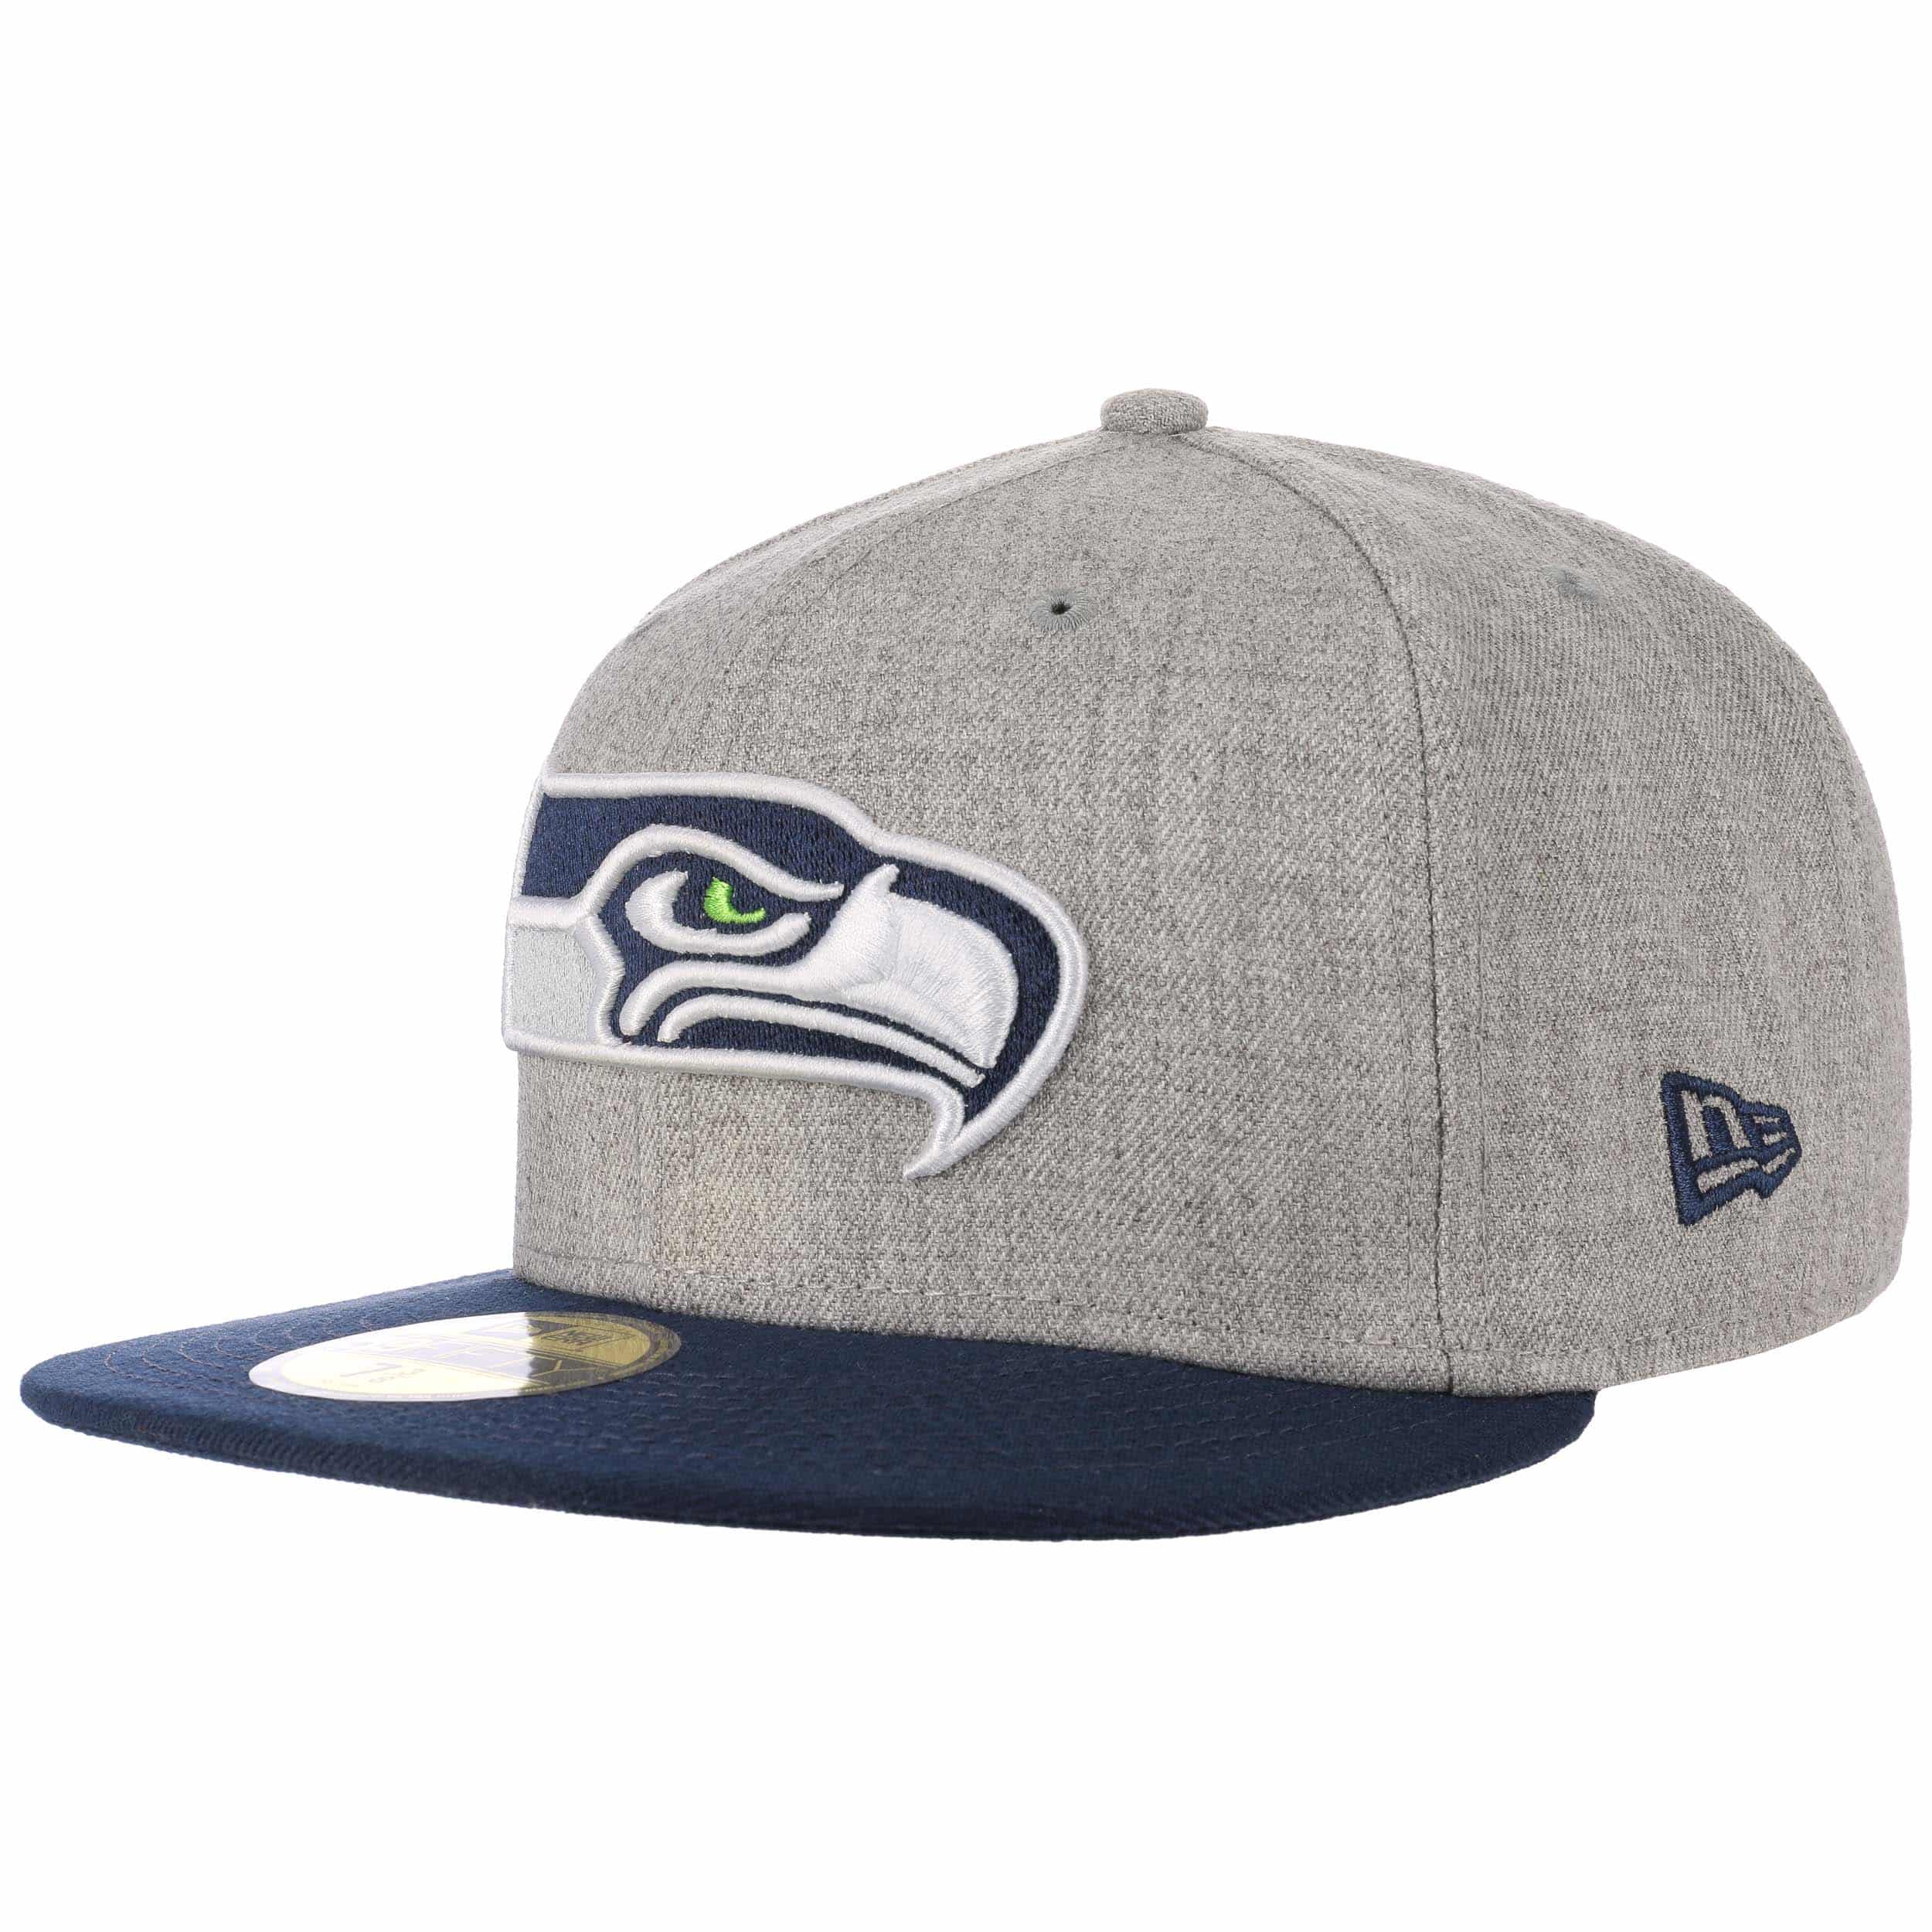 59Fifty Seahawks Fitted Cap by New Era 